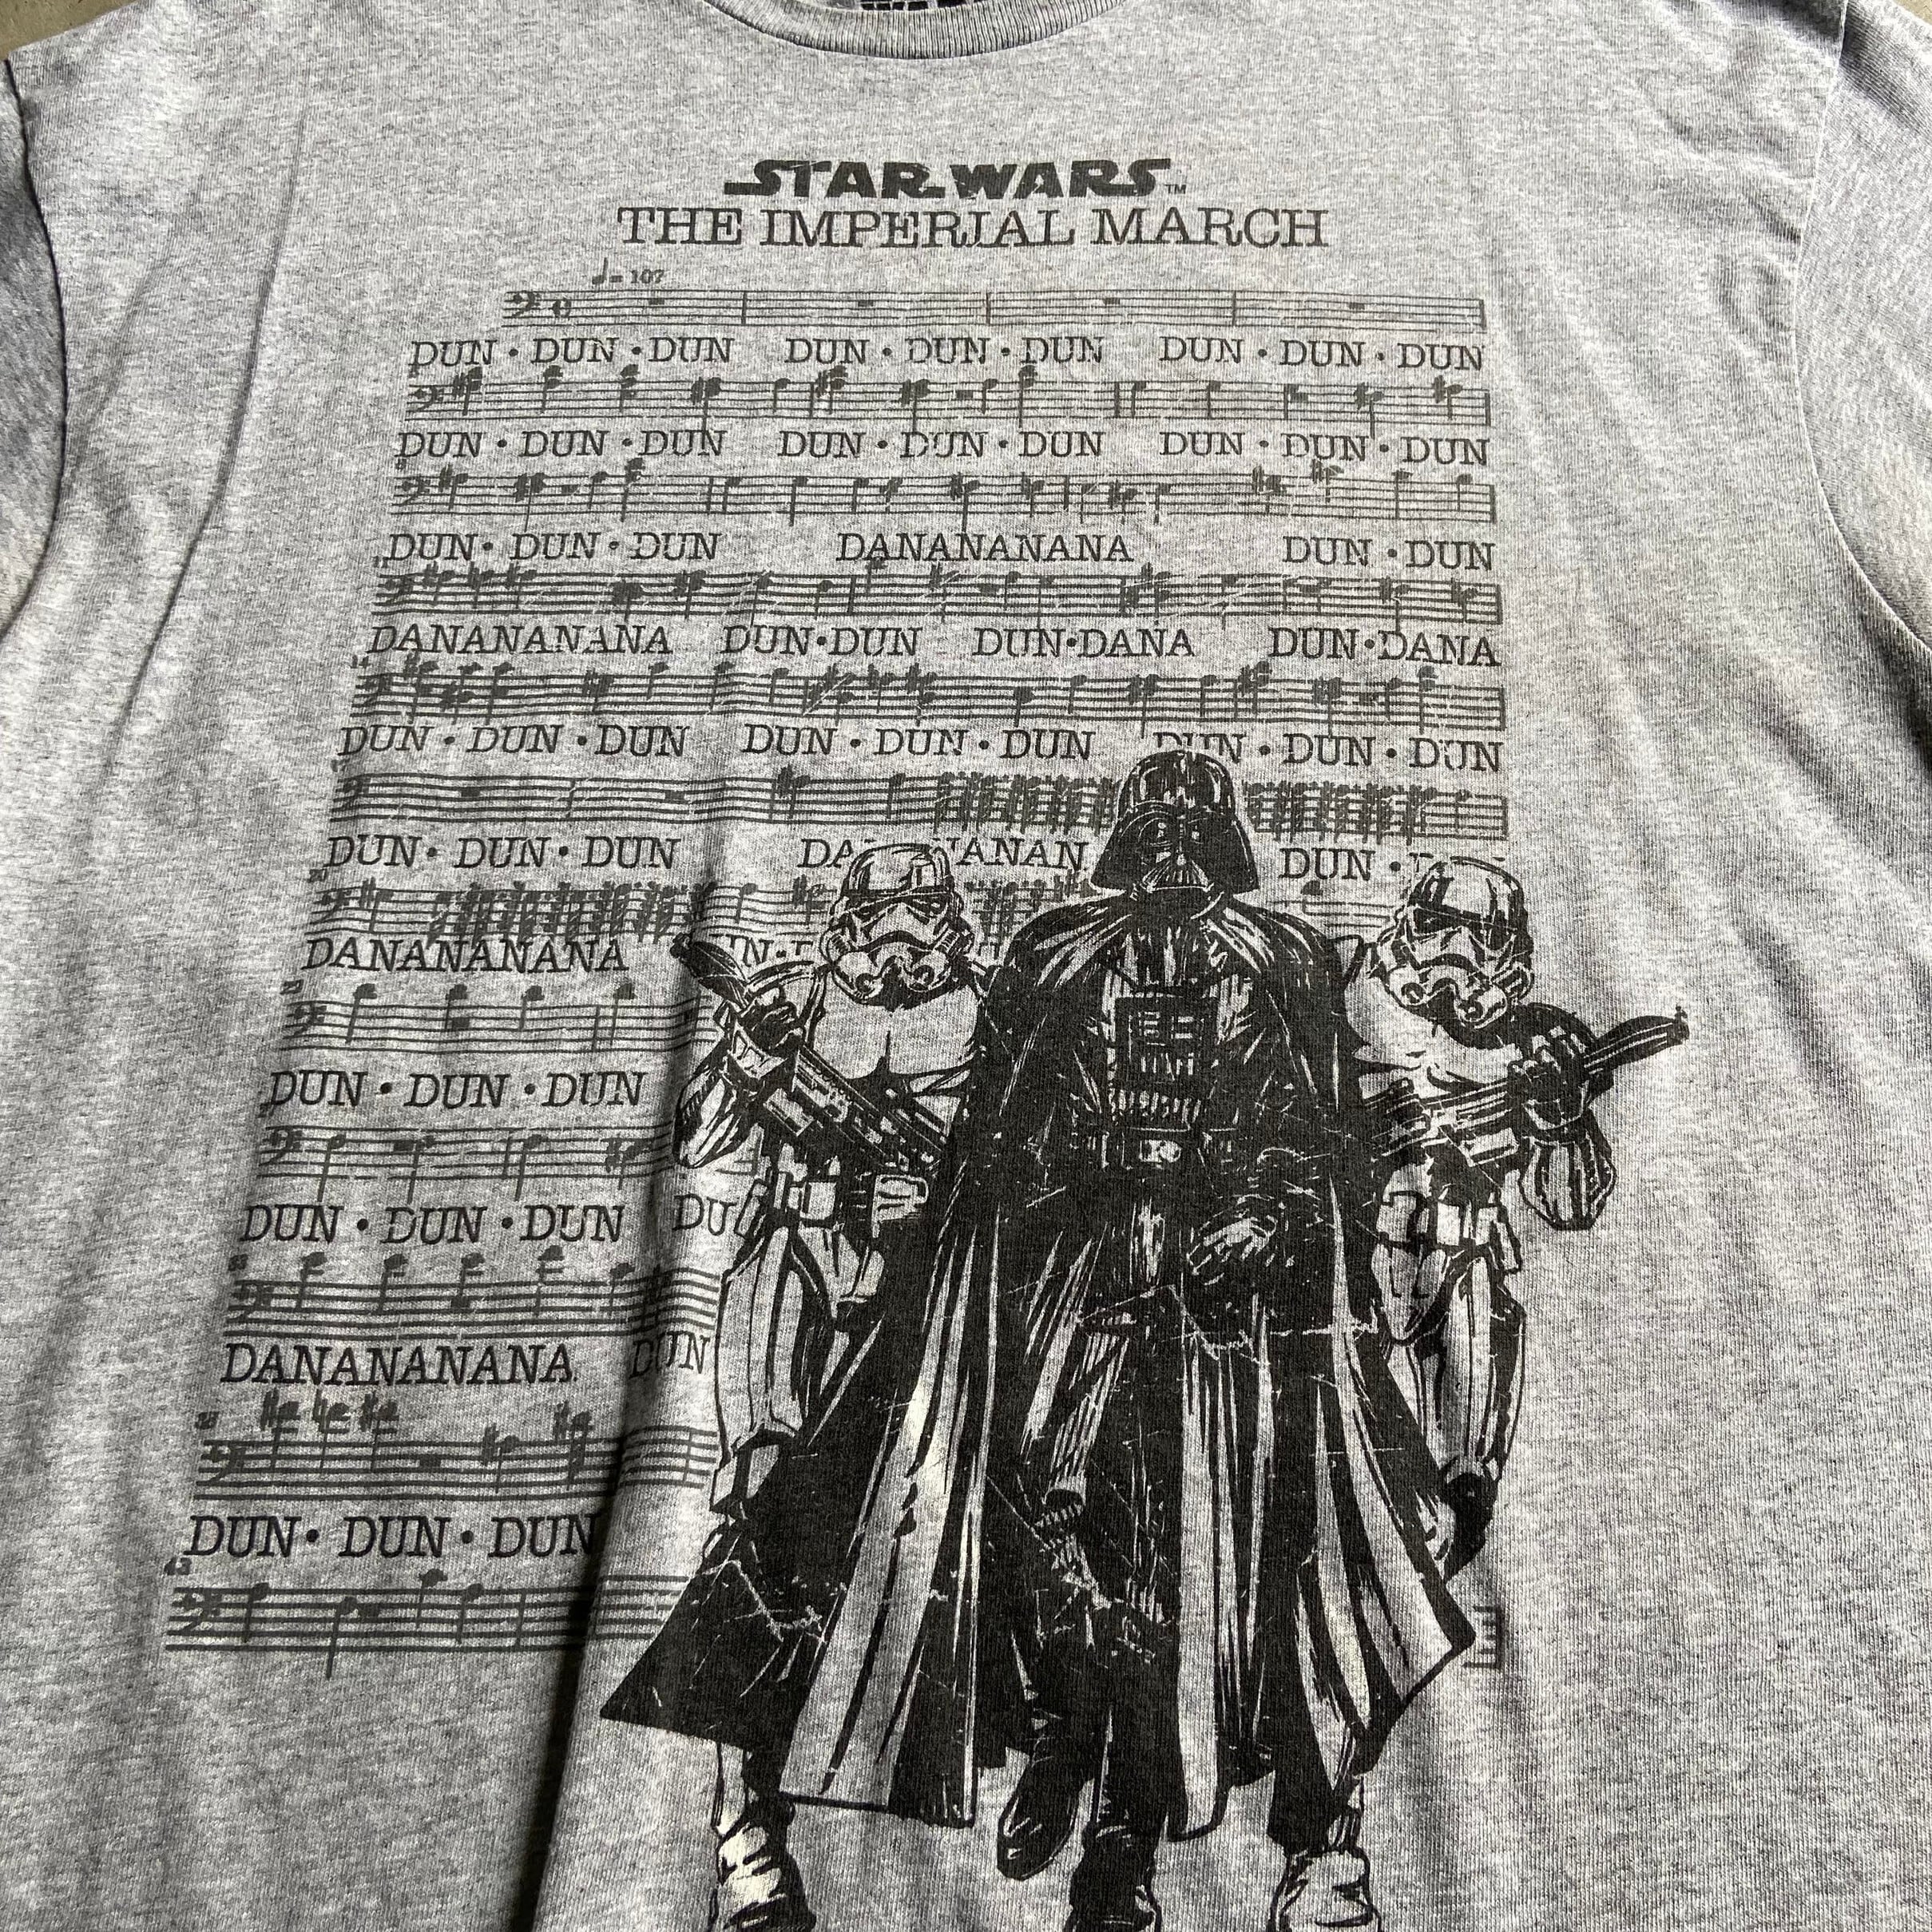 STAR WARS スターウォーズ THE IMPERIAL MARCH 楽譜 ムービーTシャツ